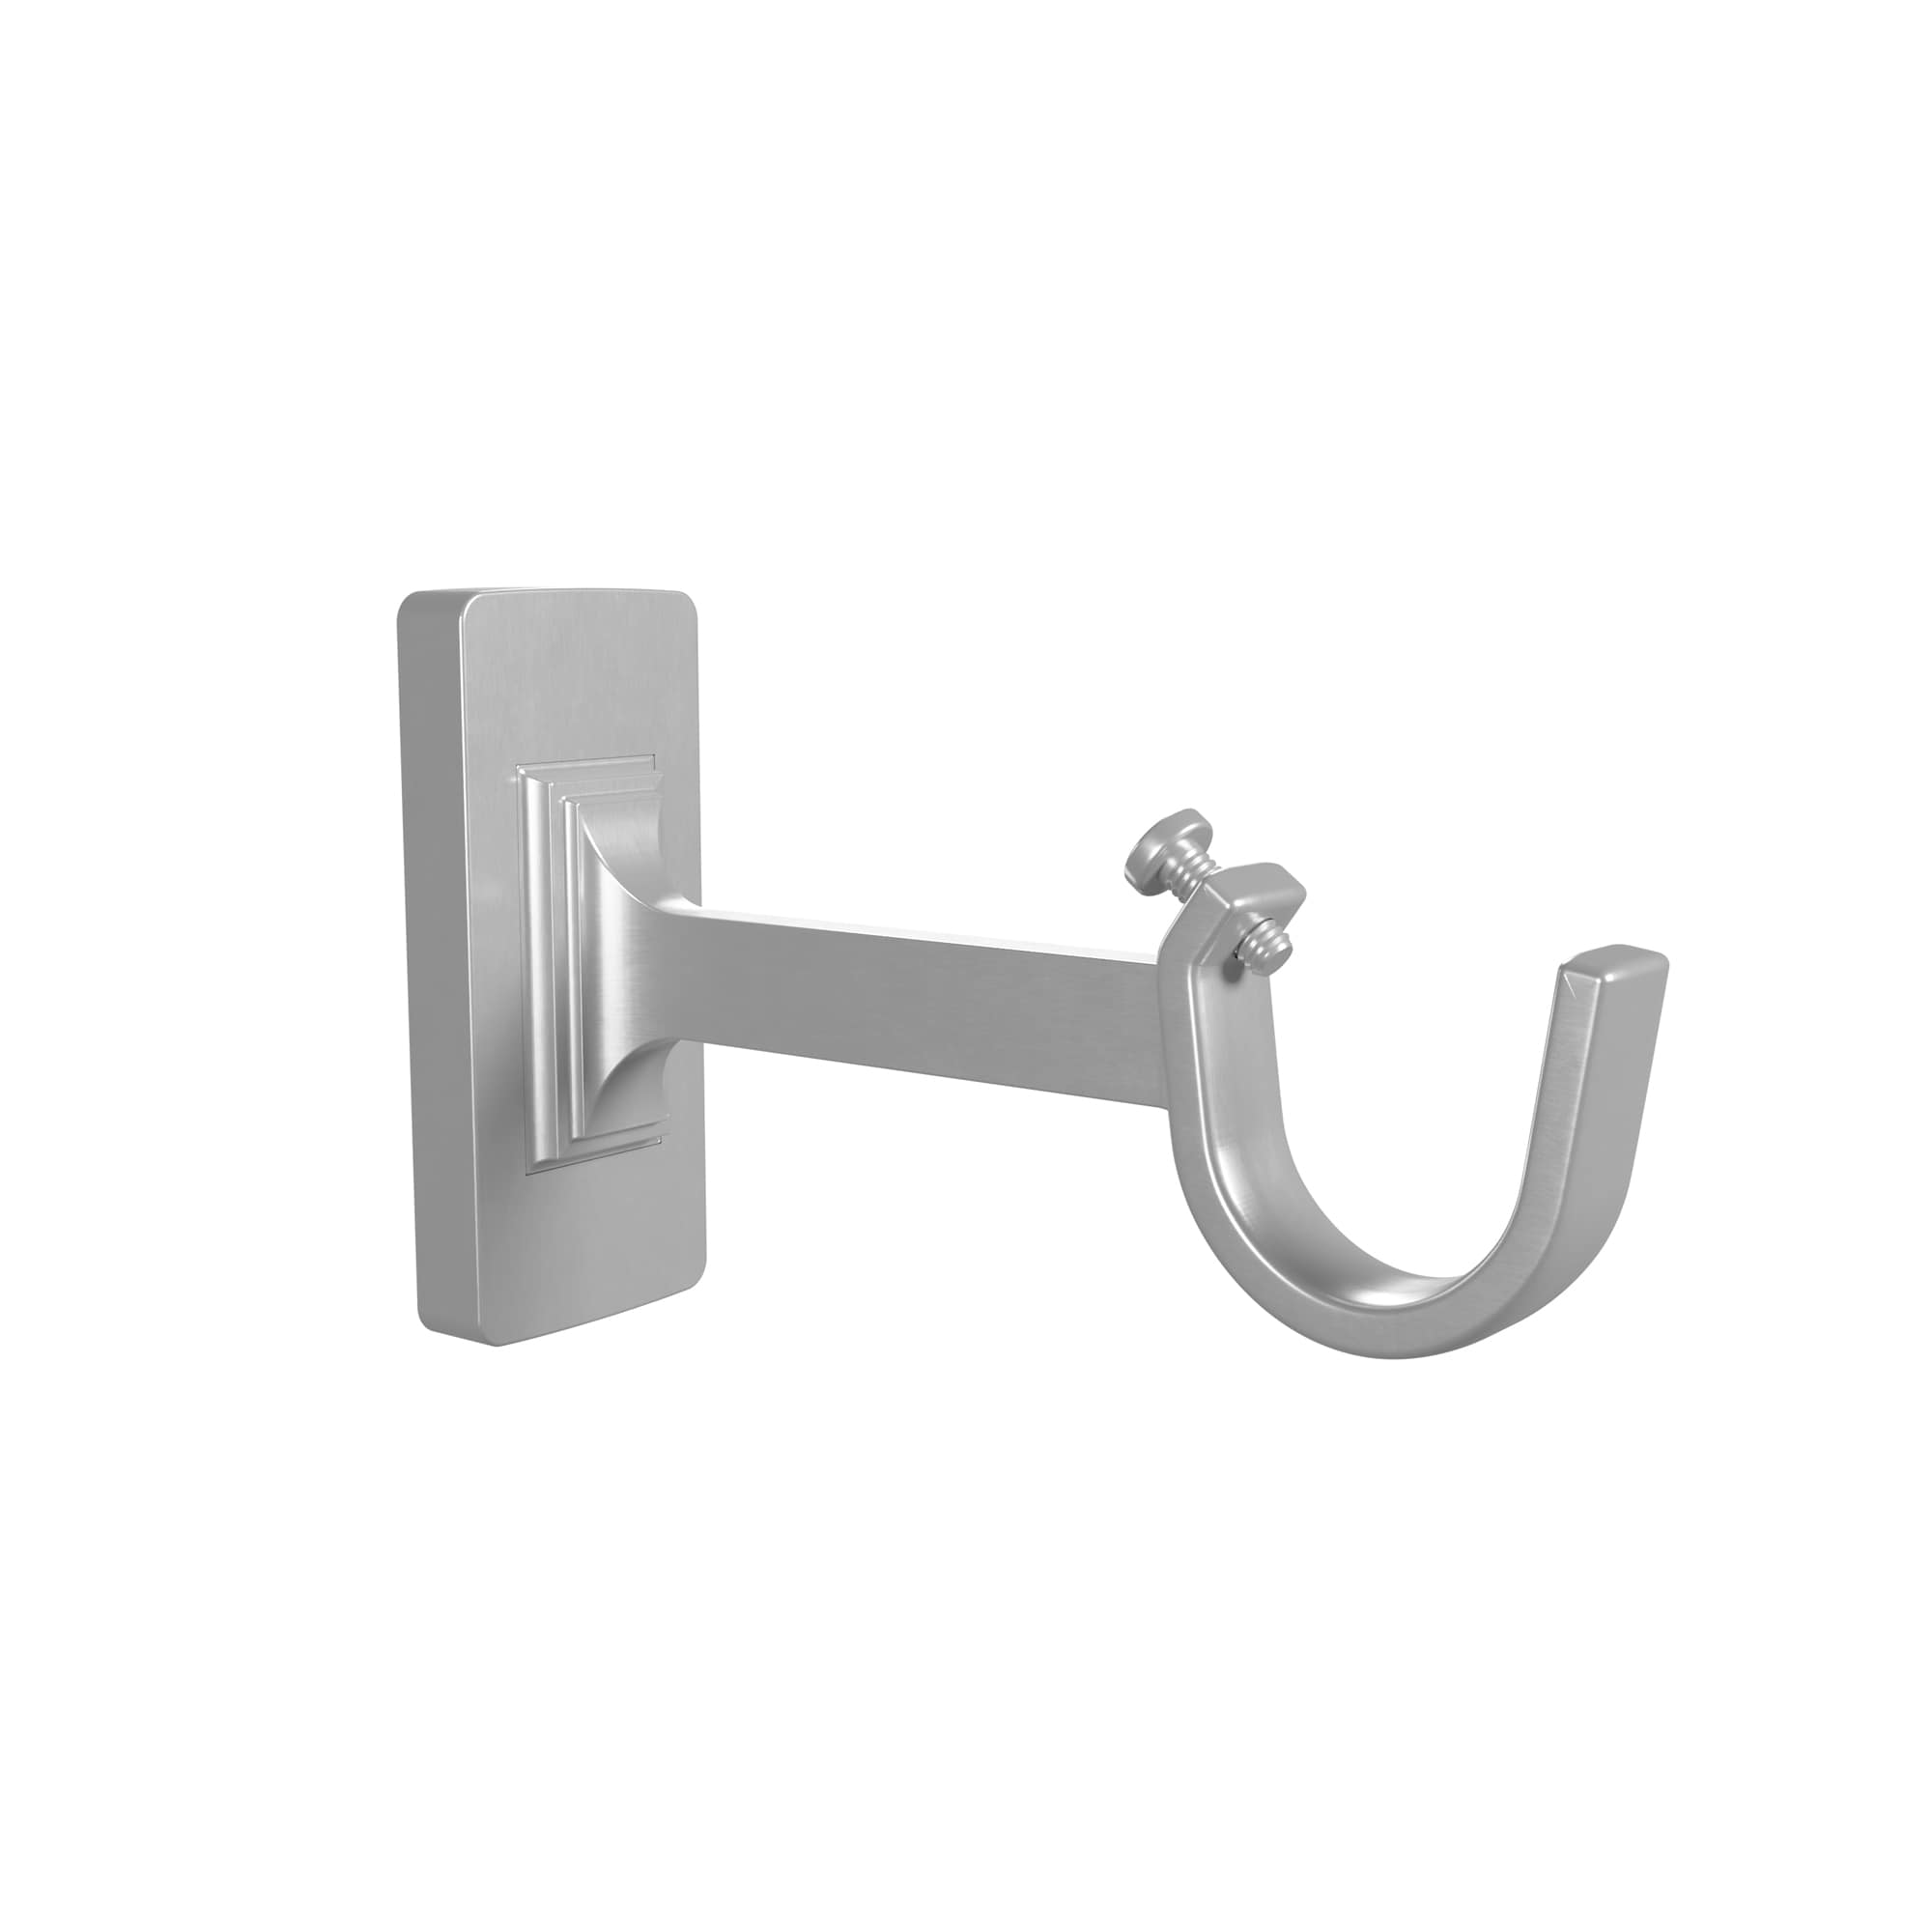 Aluminum Silver Curtain Rod Brackets at Lowes.com